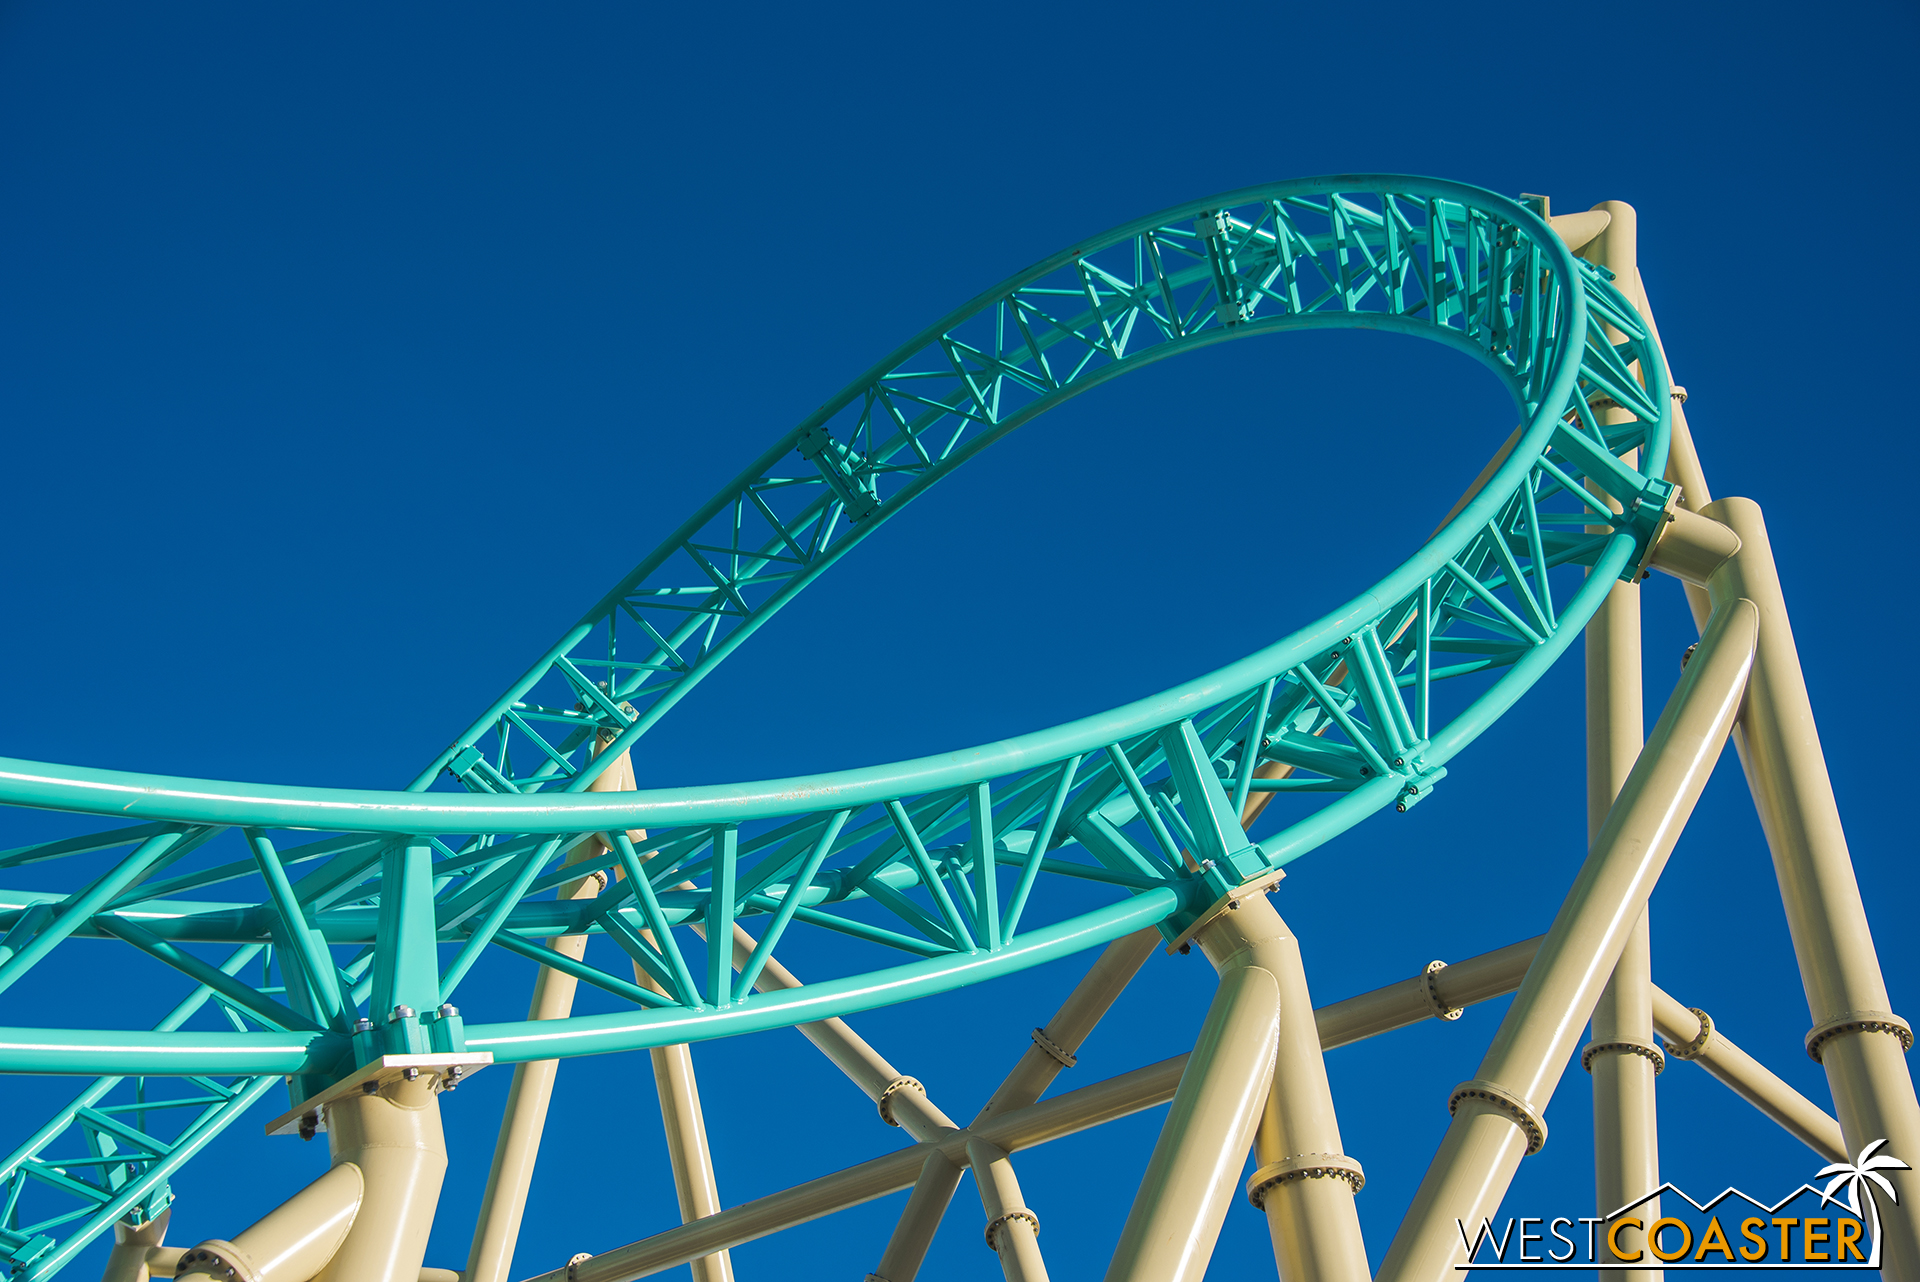  This sexy turnaround is one of five inversions on the ride, technically the first "dive coaster" in California. 